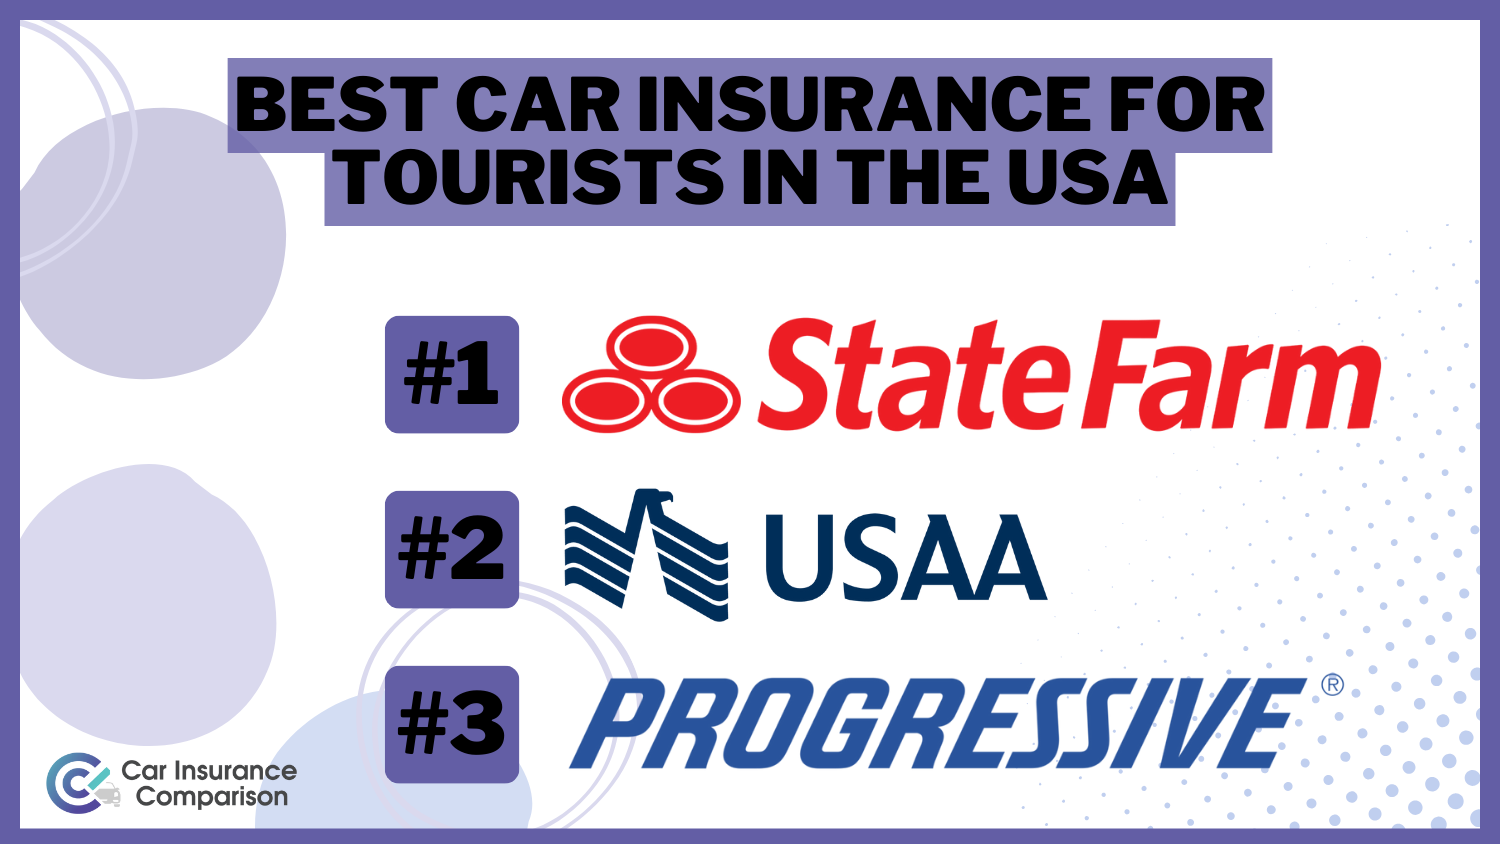 Best Car Insurance for Tourists in the USA: State Farm, USAA, and Progressive.